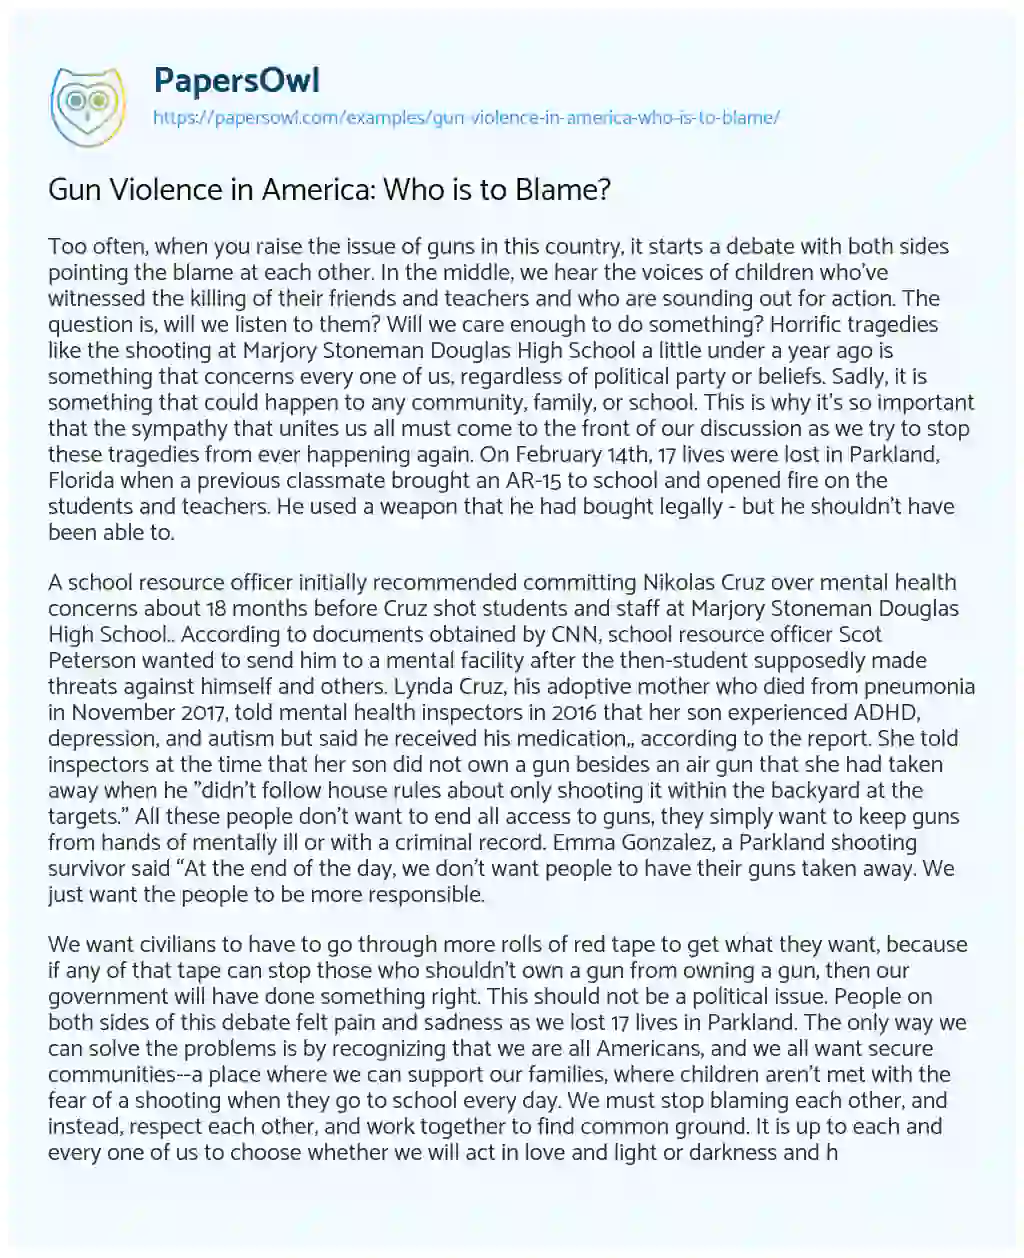 Gun Violence in America: who is to Blame? essay